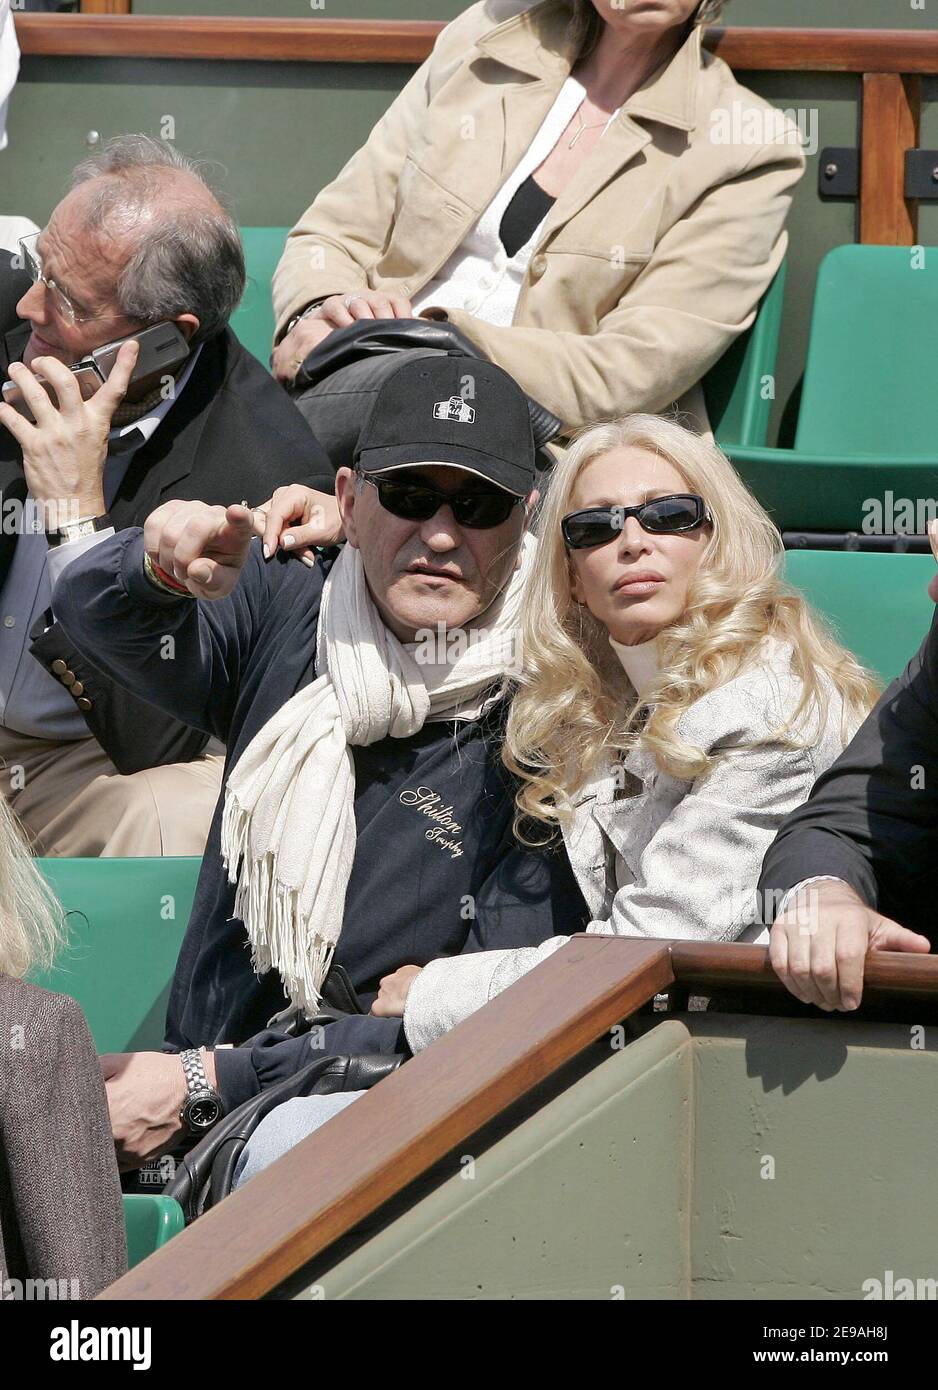 French humorist Jean-Marie Bigard with his wife Claudia during the French  Open Tennis tournament held at Roland-Garros stadium in Paris, France on  May 29, 2006. Photo by Gouhier-Nebinger-Zabulon/ABACAPRESS.COM Stock Photo  - Alamy